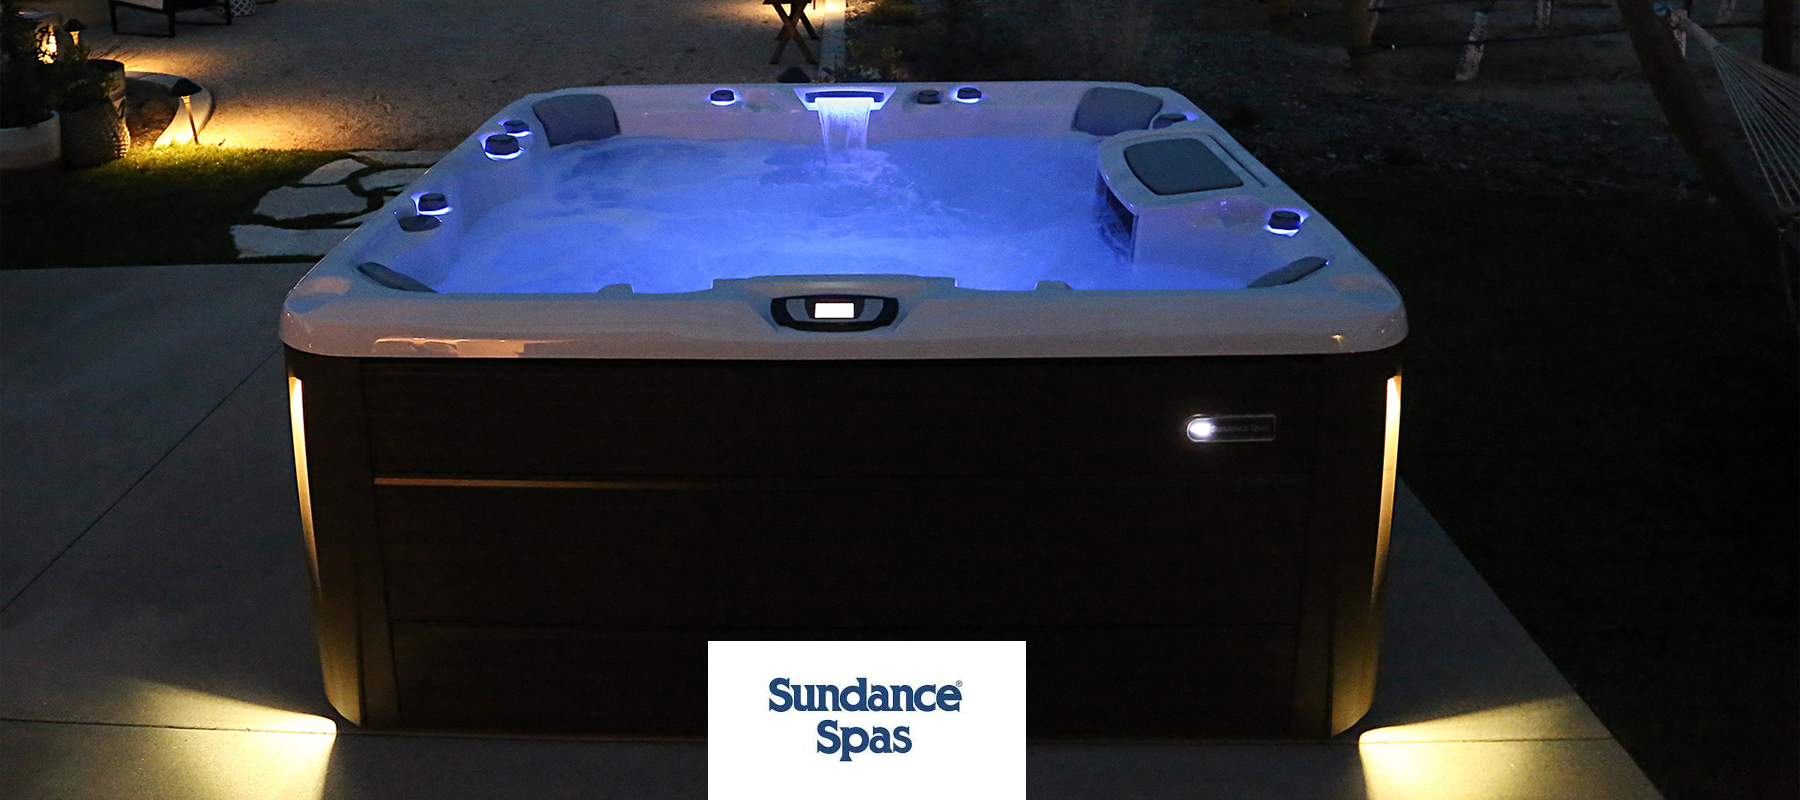 How Much Does a Sundance Spa Cost?